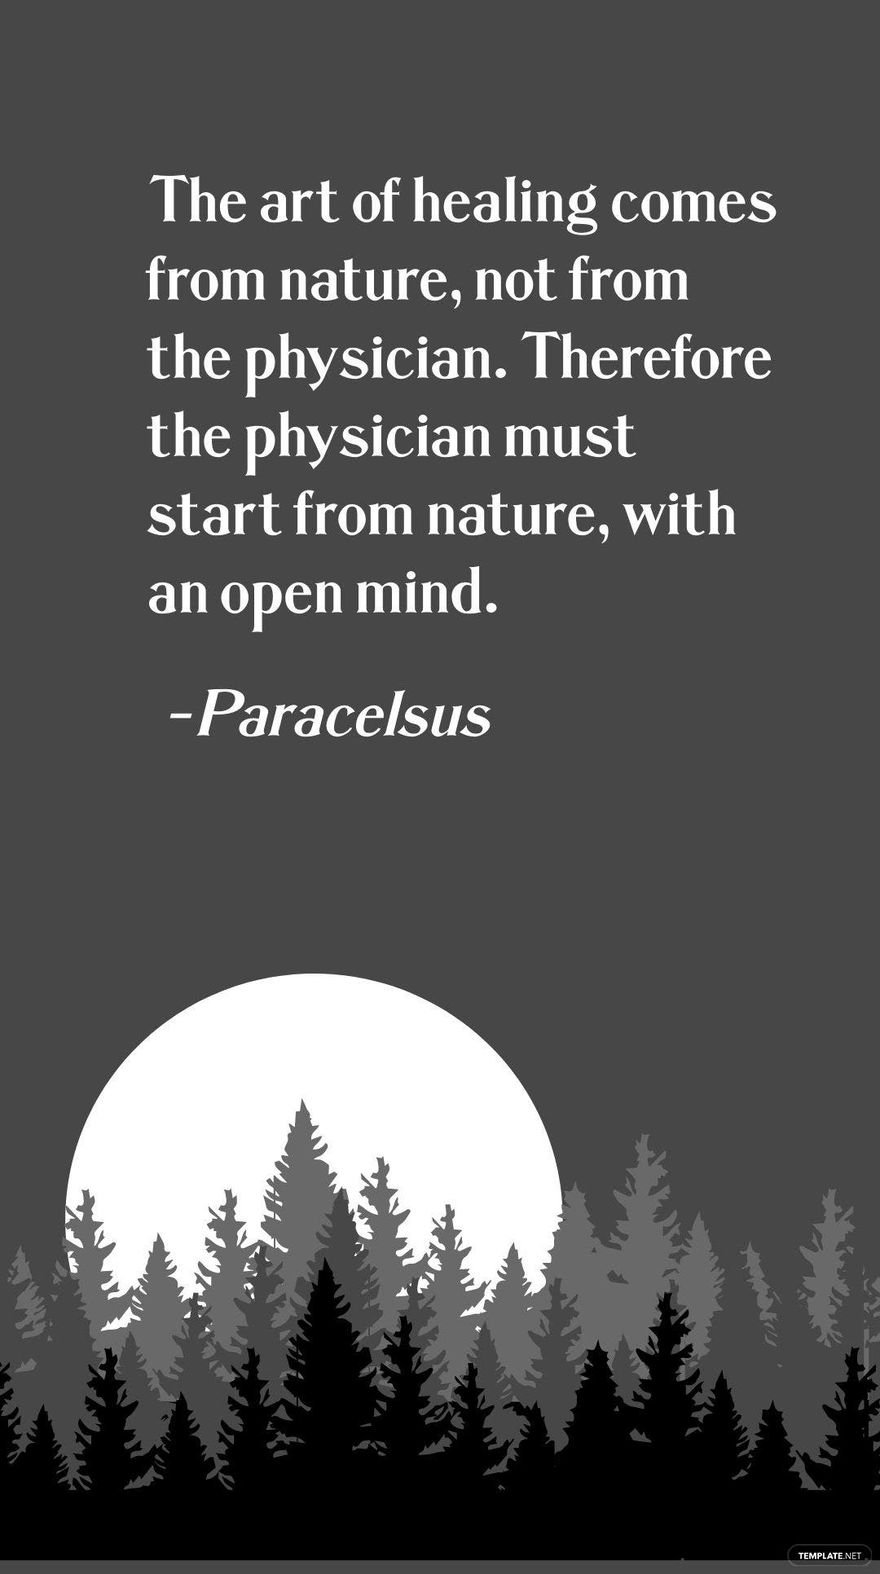 Free Paracelsus - The art of healing comes from nature, not from the physician. Therefore the physician must start from nature, with an open mind. in JPG